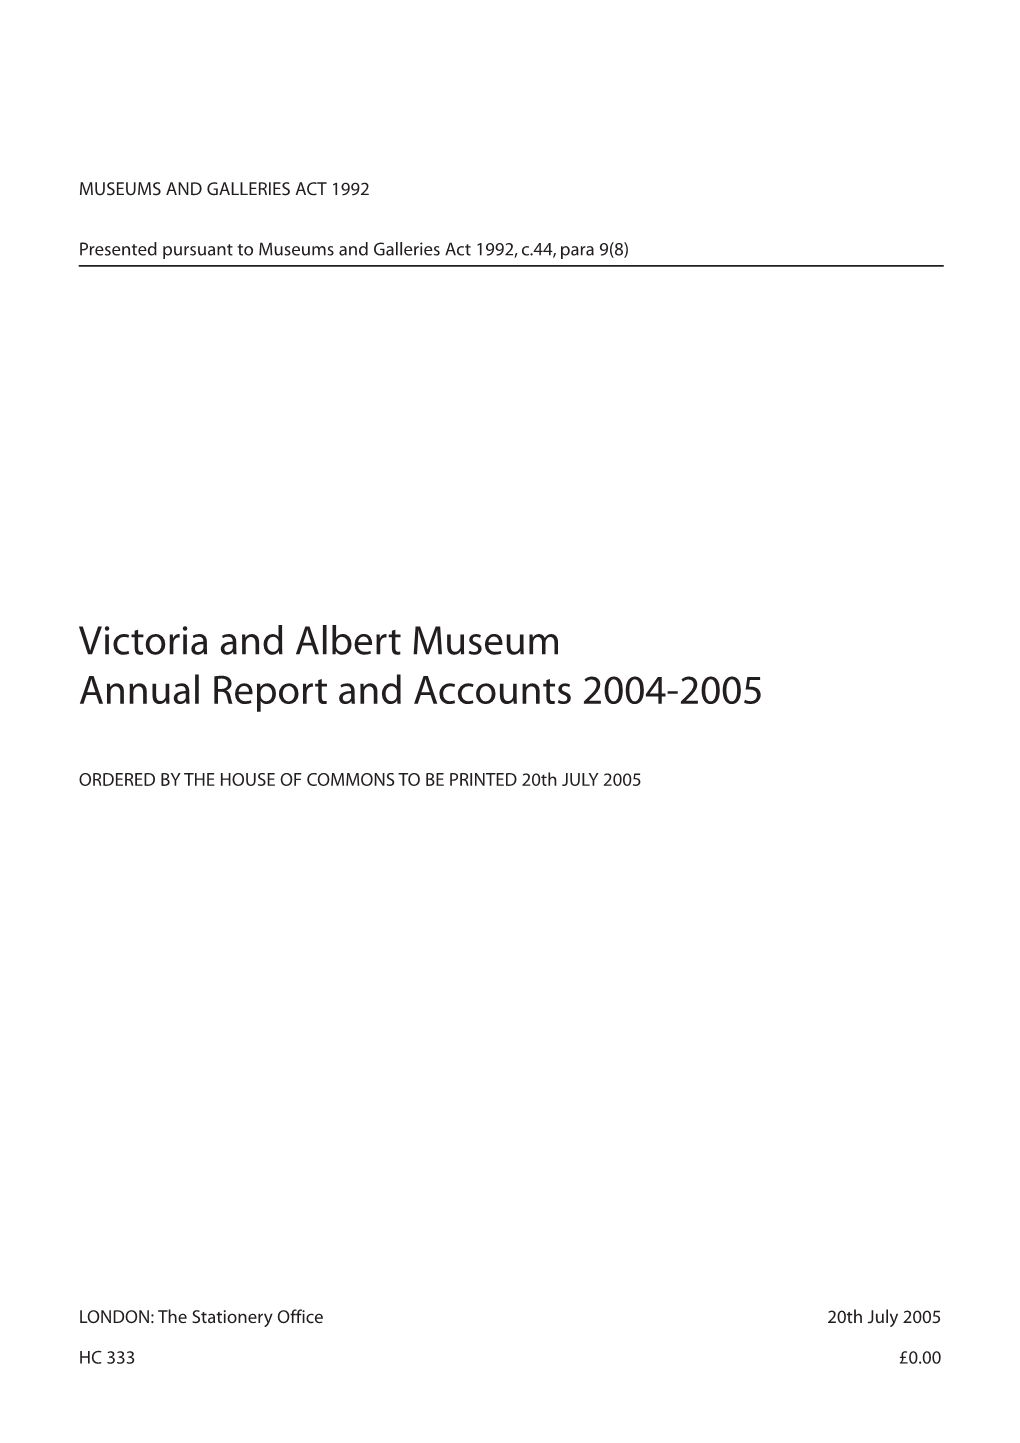 Victoria and Albert Museum Annual Report and Accounts 2004-2005